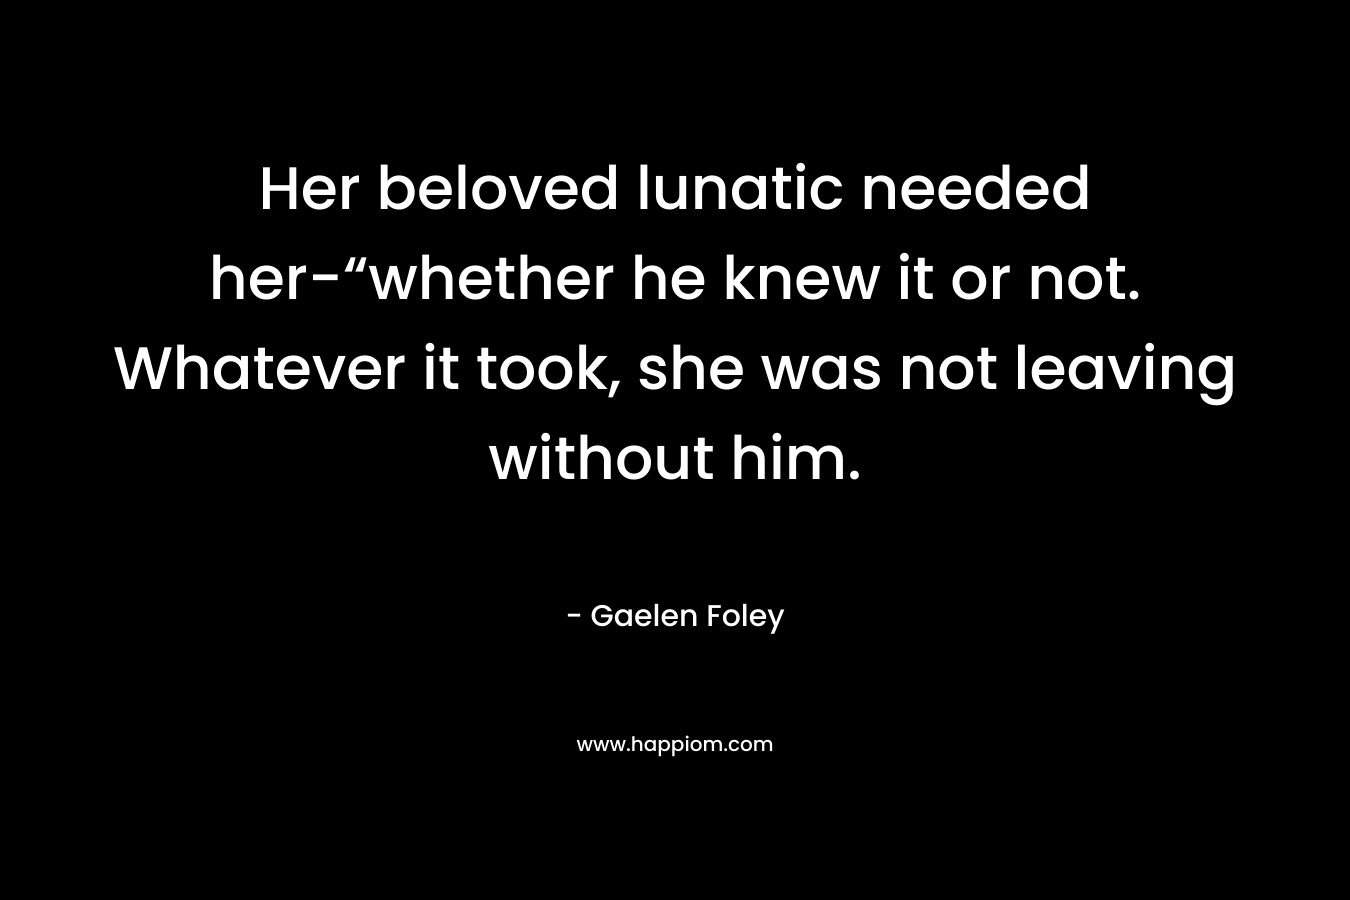 Her beloved lunatic needed her-“whether he knew it or not. Whatever it took, she was not leaving without him. – Gaelen Foley